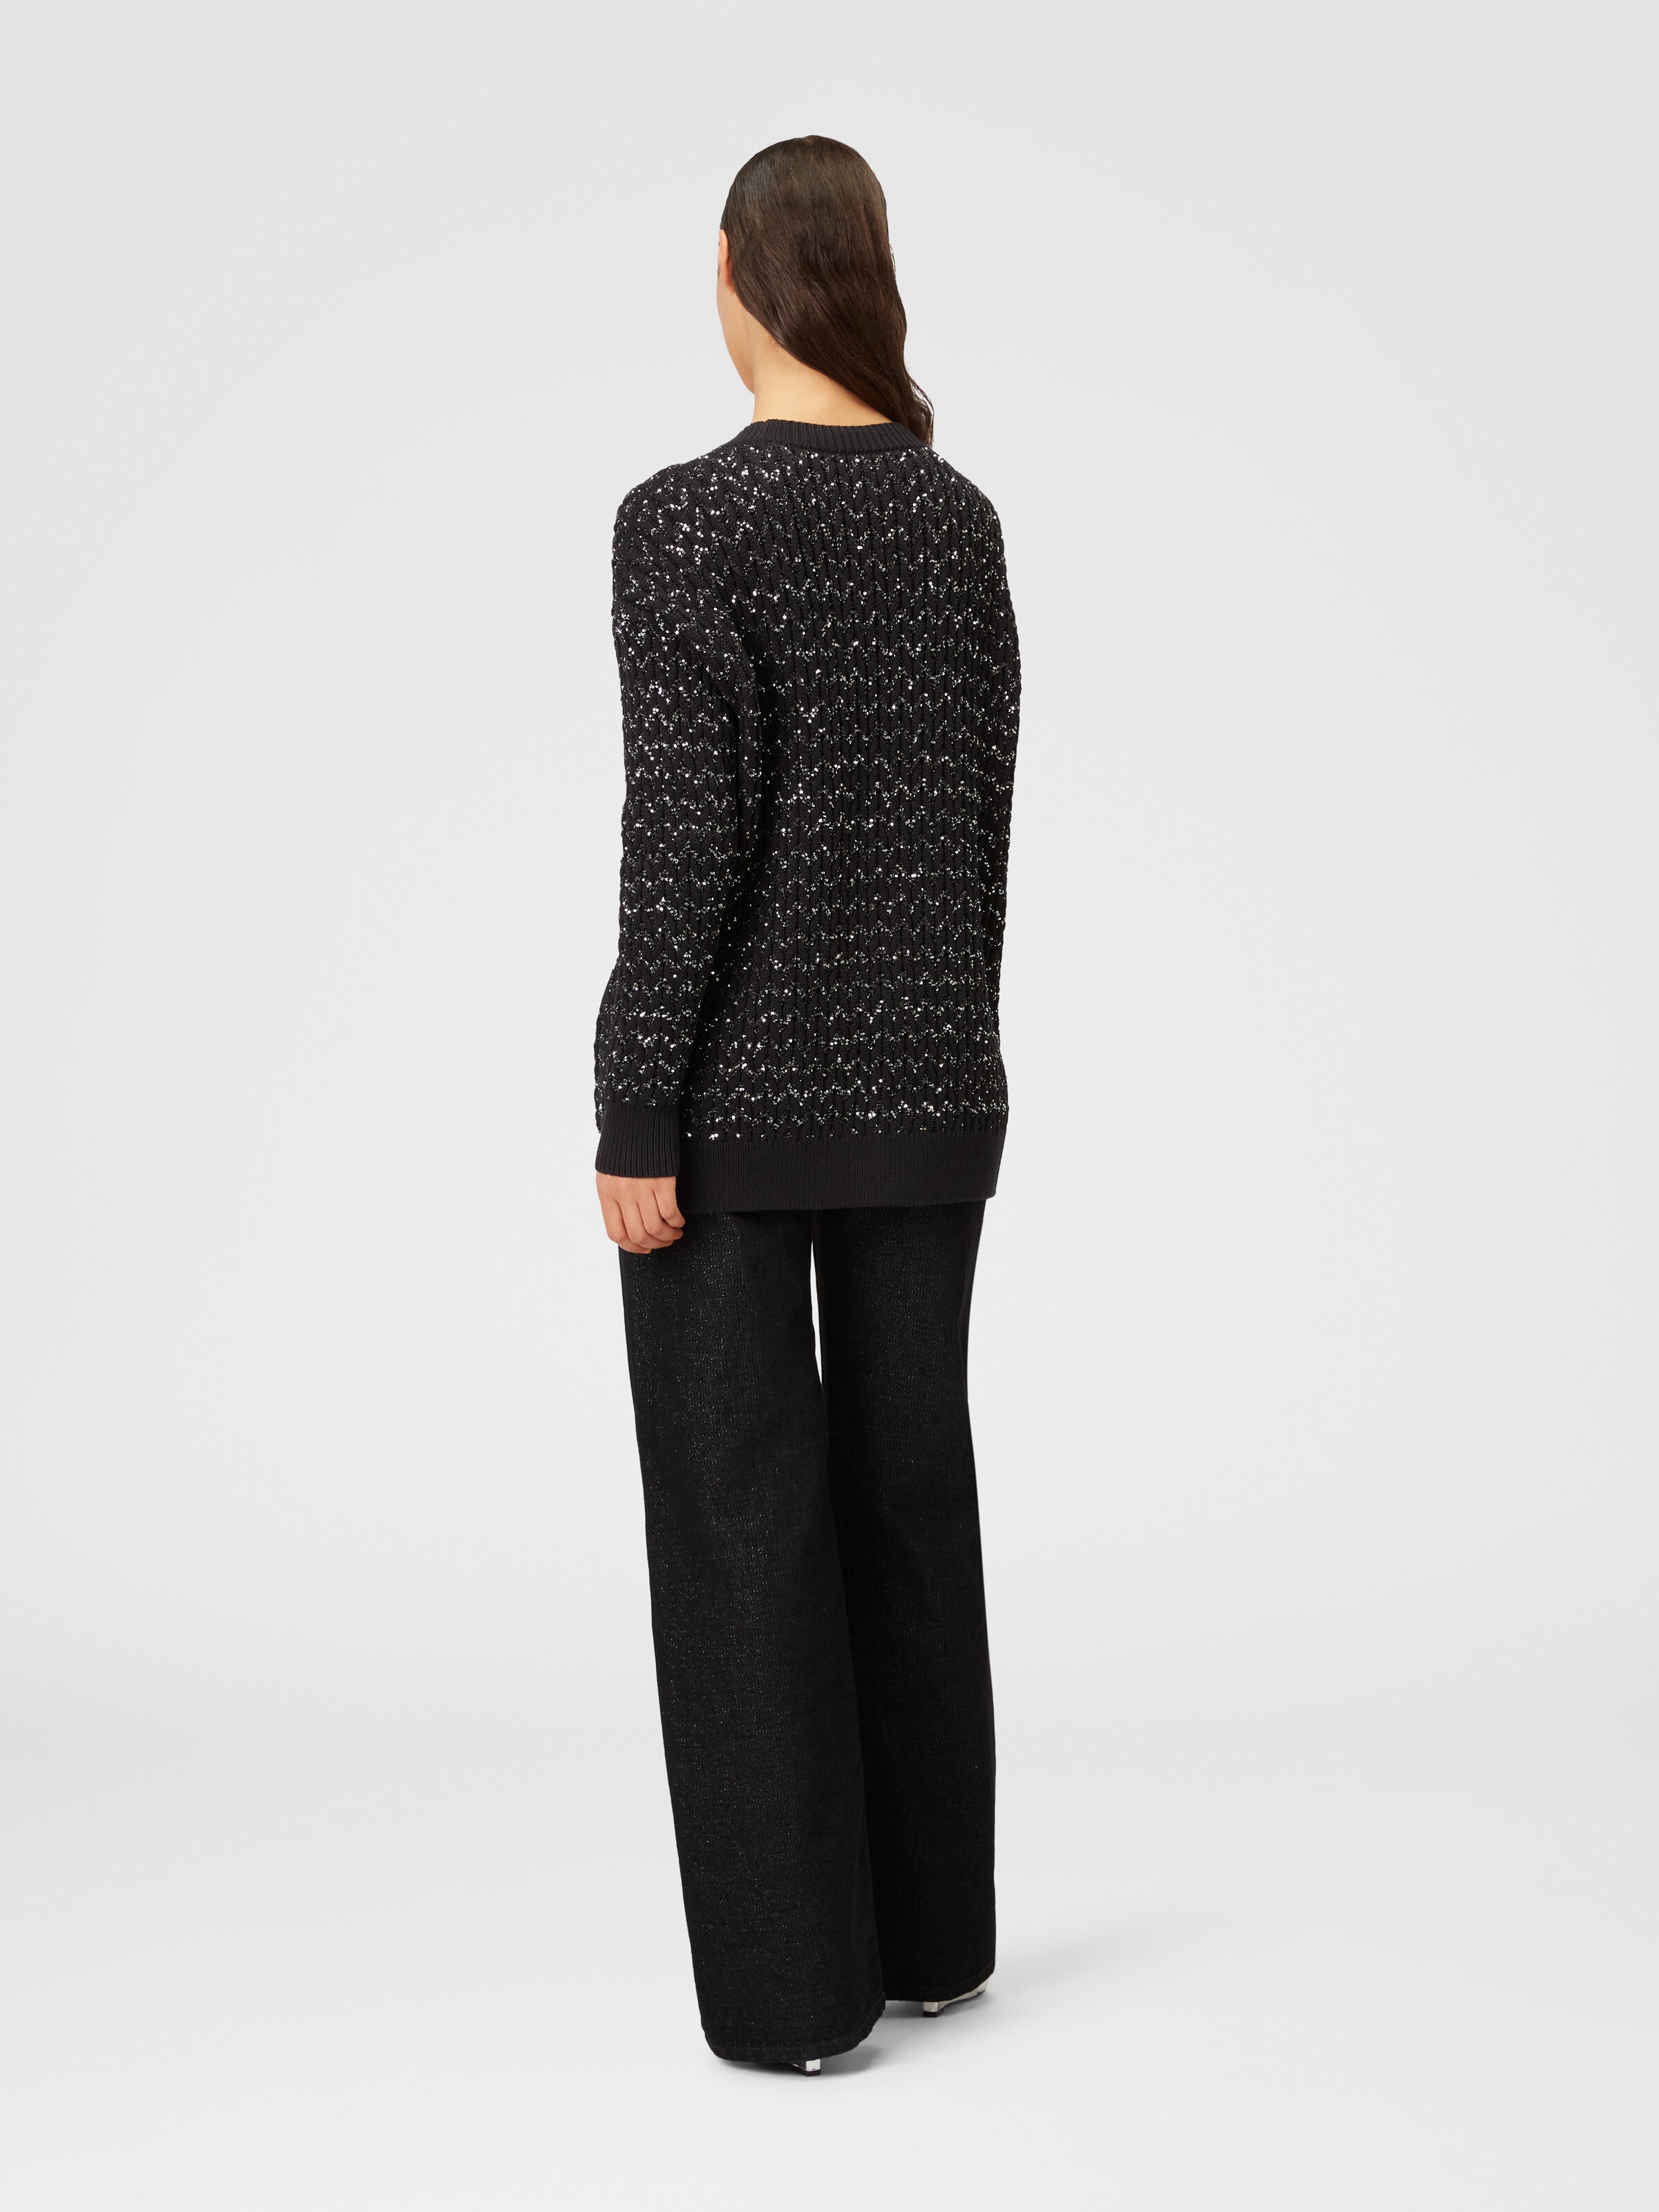 Oversized cardigan in knit with braiding and sequins, Black    - 2